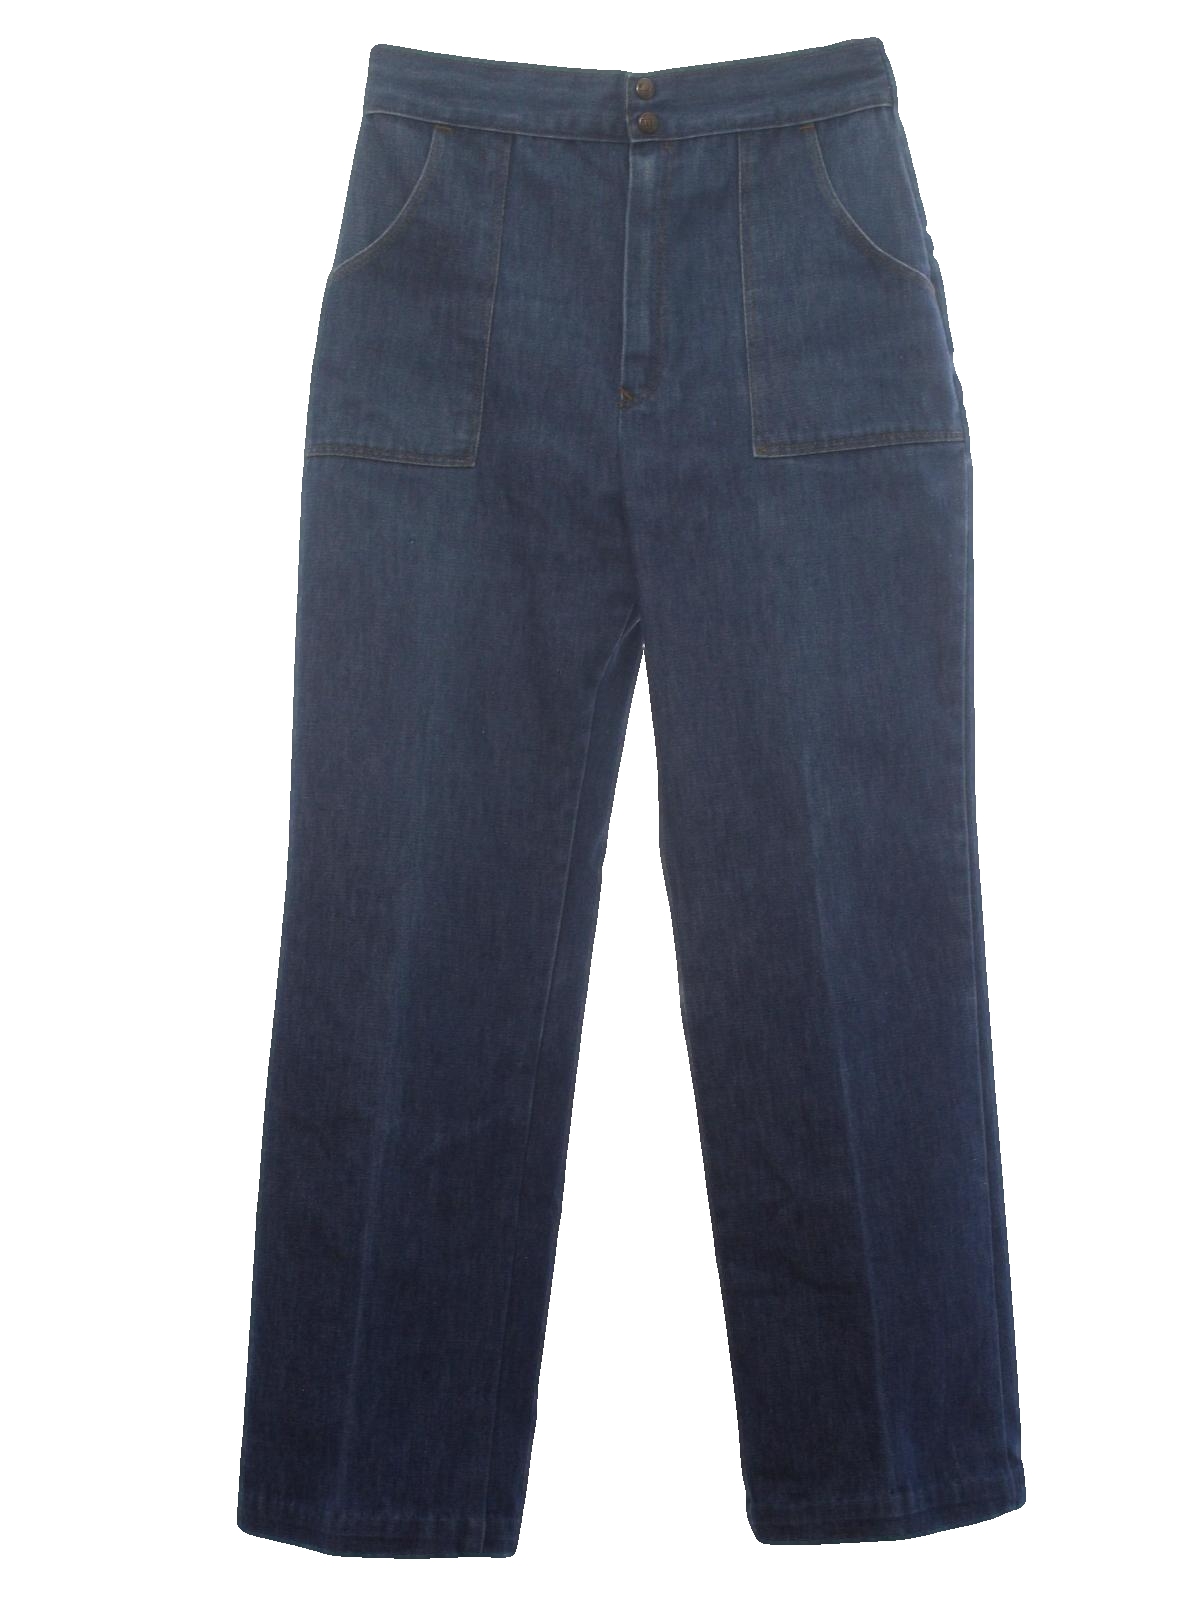 70's Sears Pants: 70s -Sears- Womens blue cotton and polyester denim ...